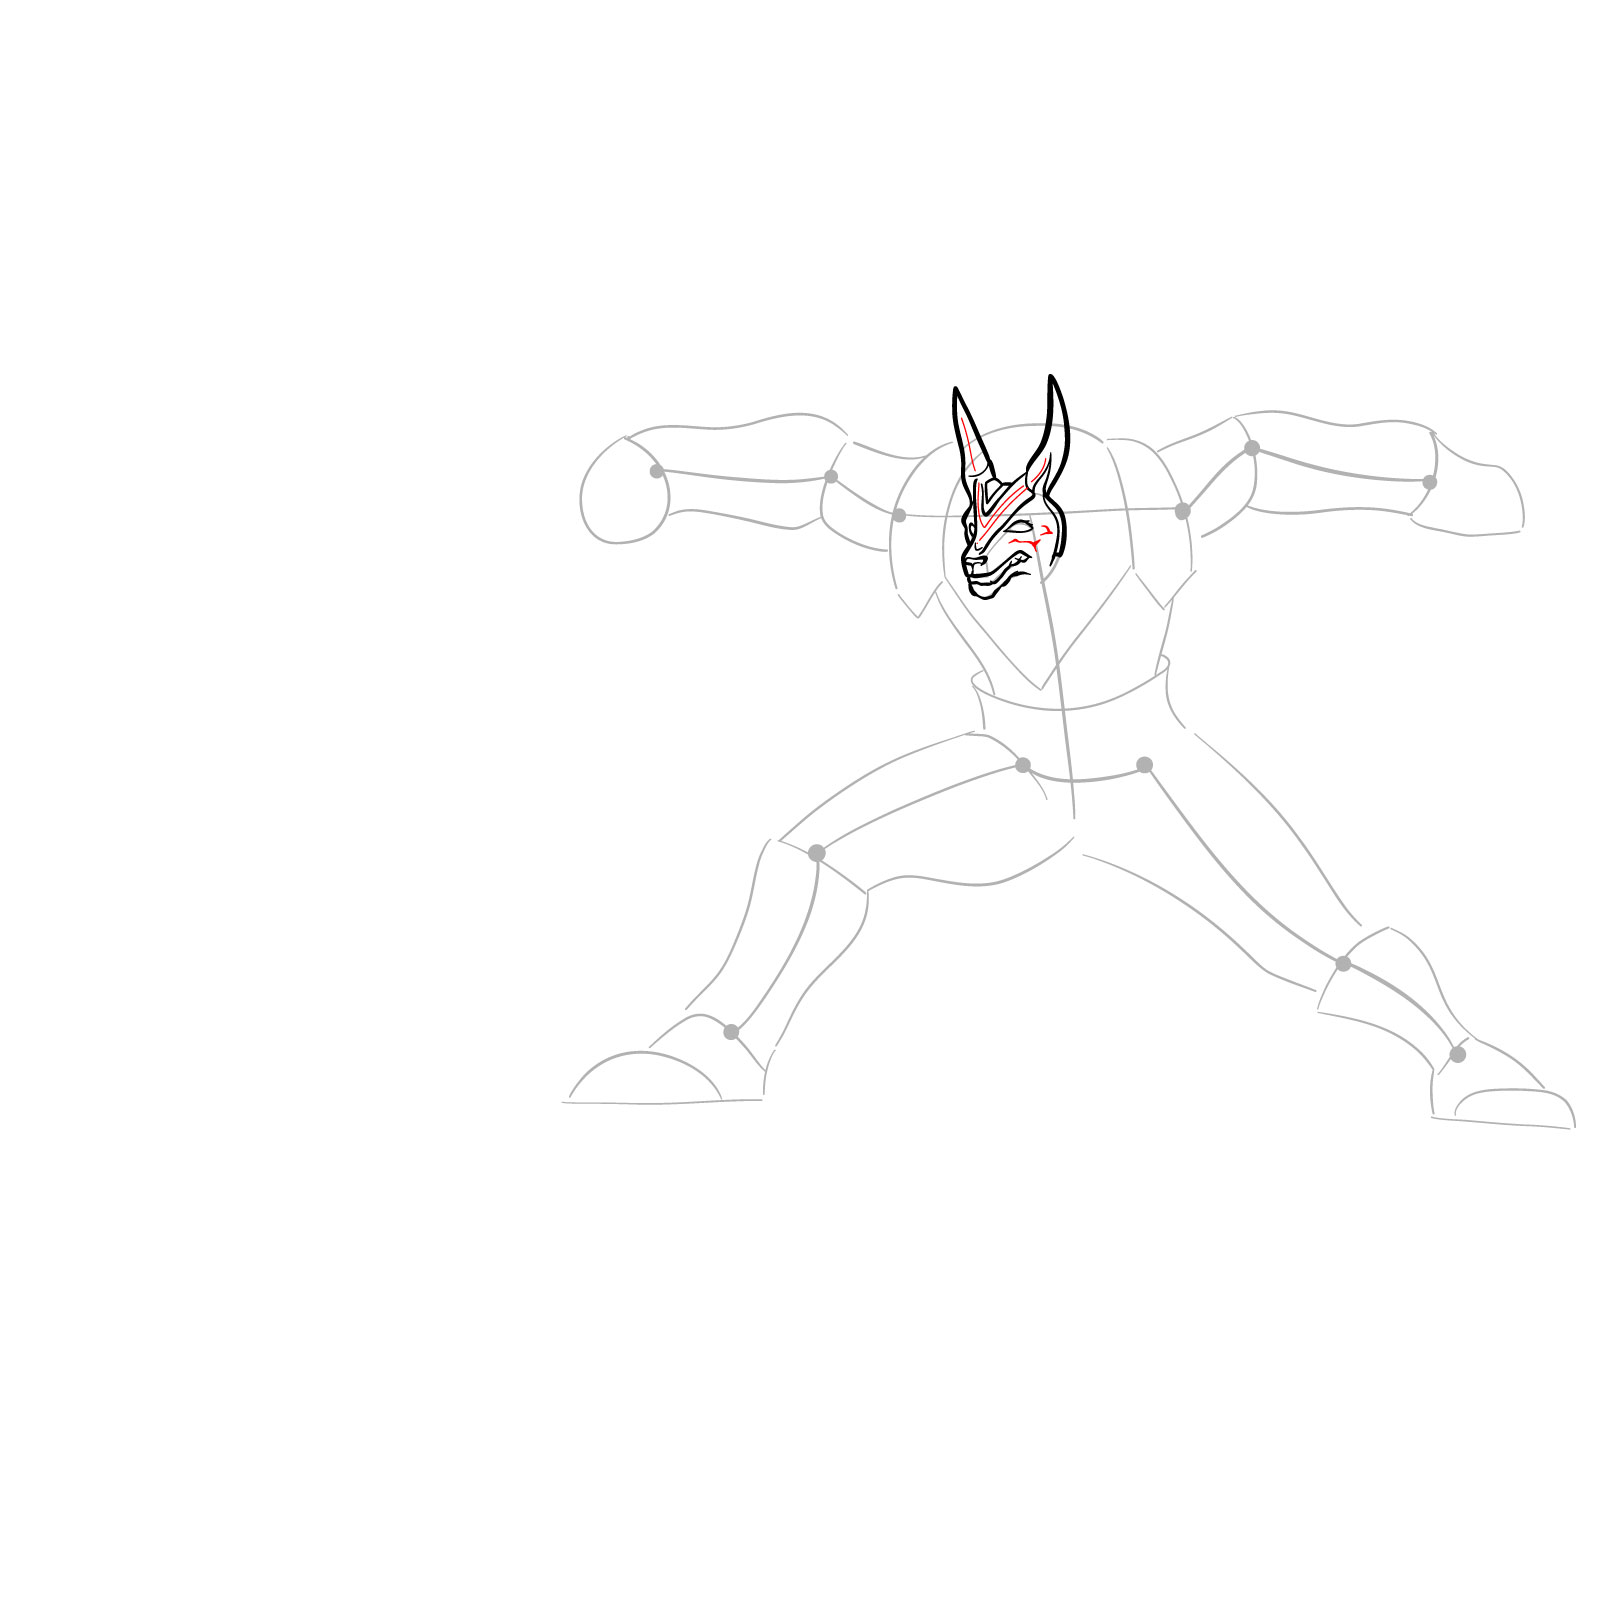 How to draw Nasus - League of Legends - step 12